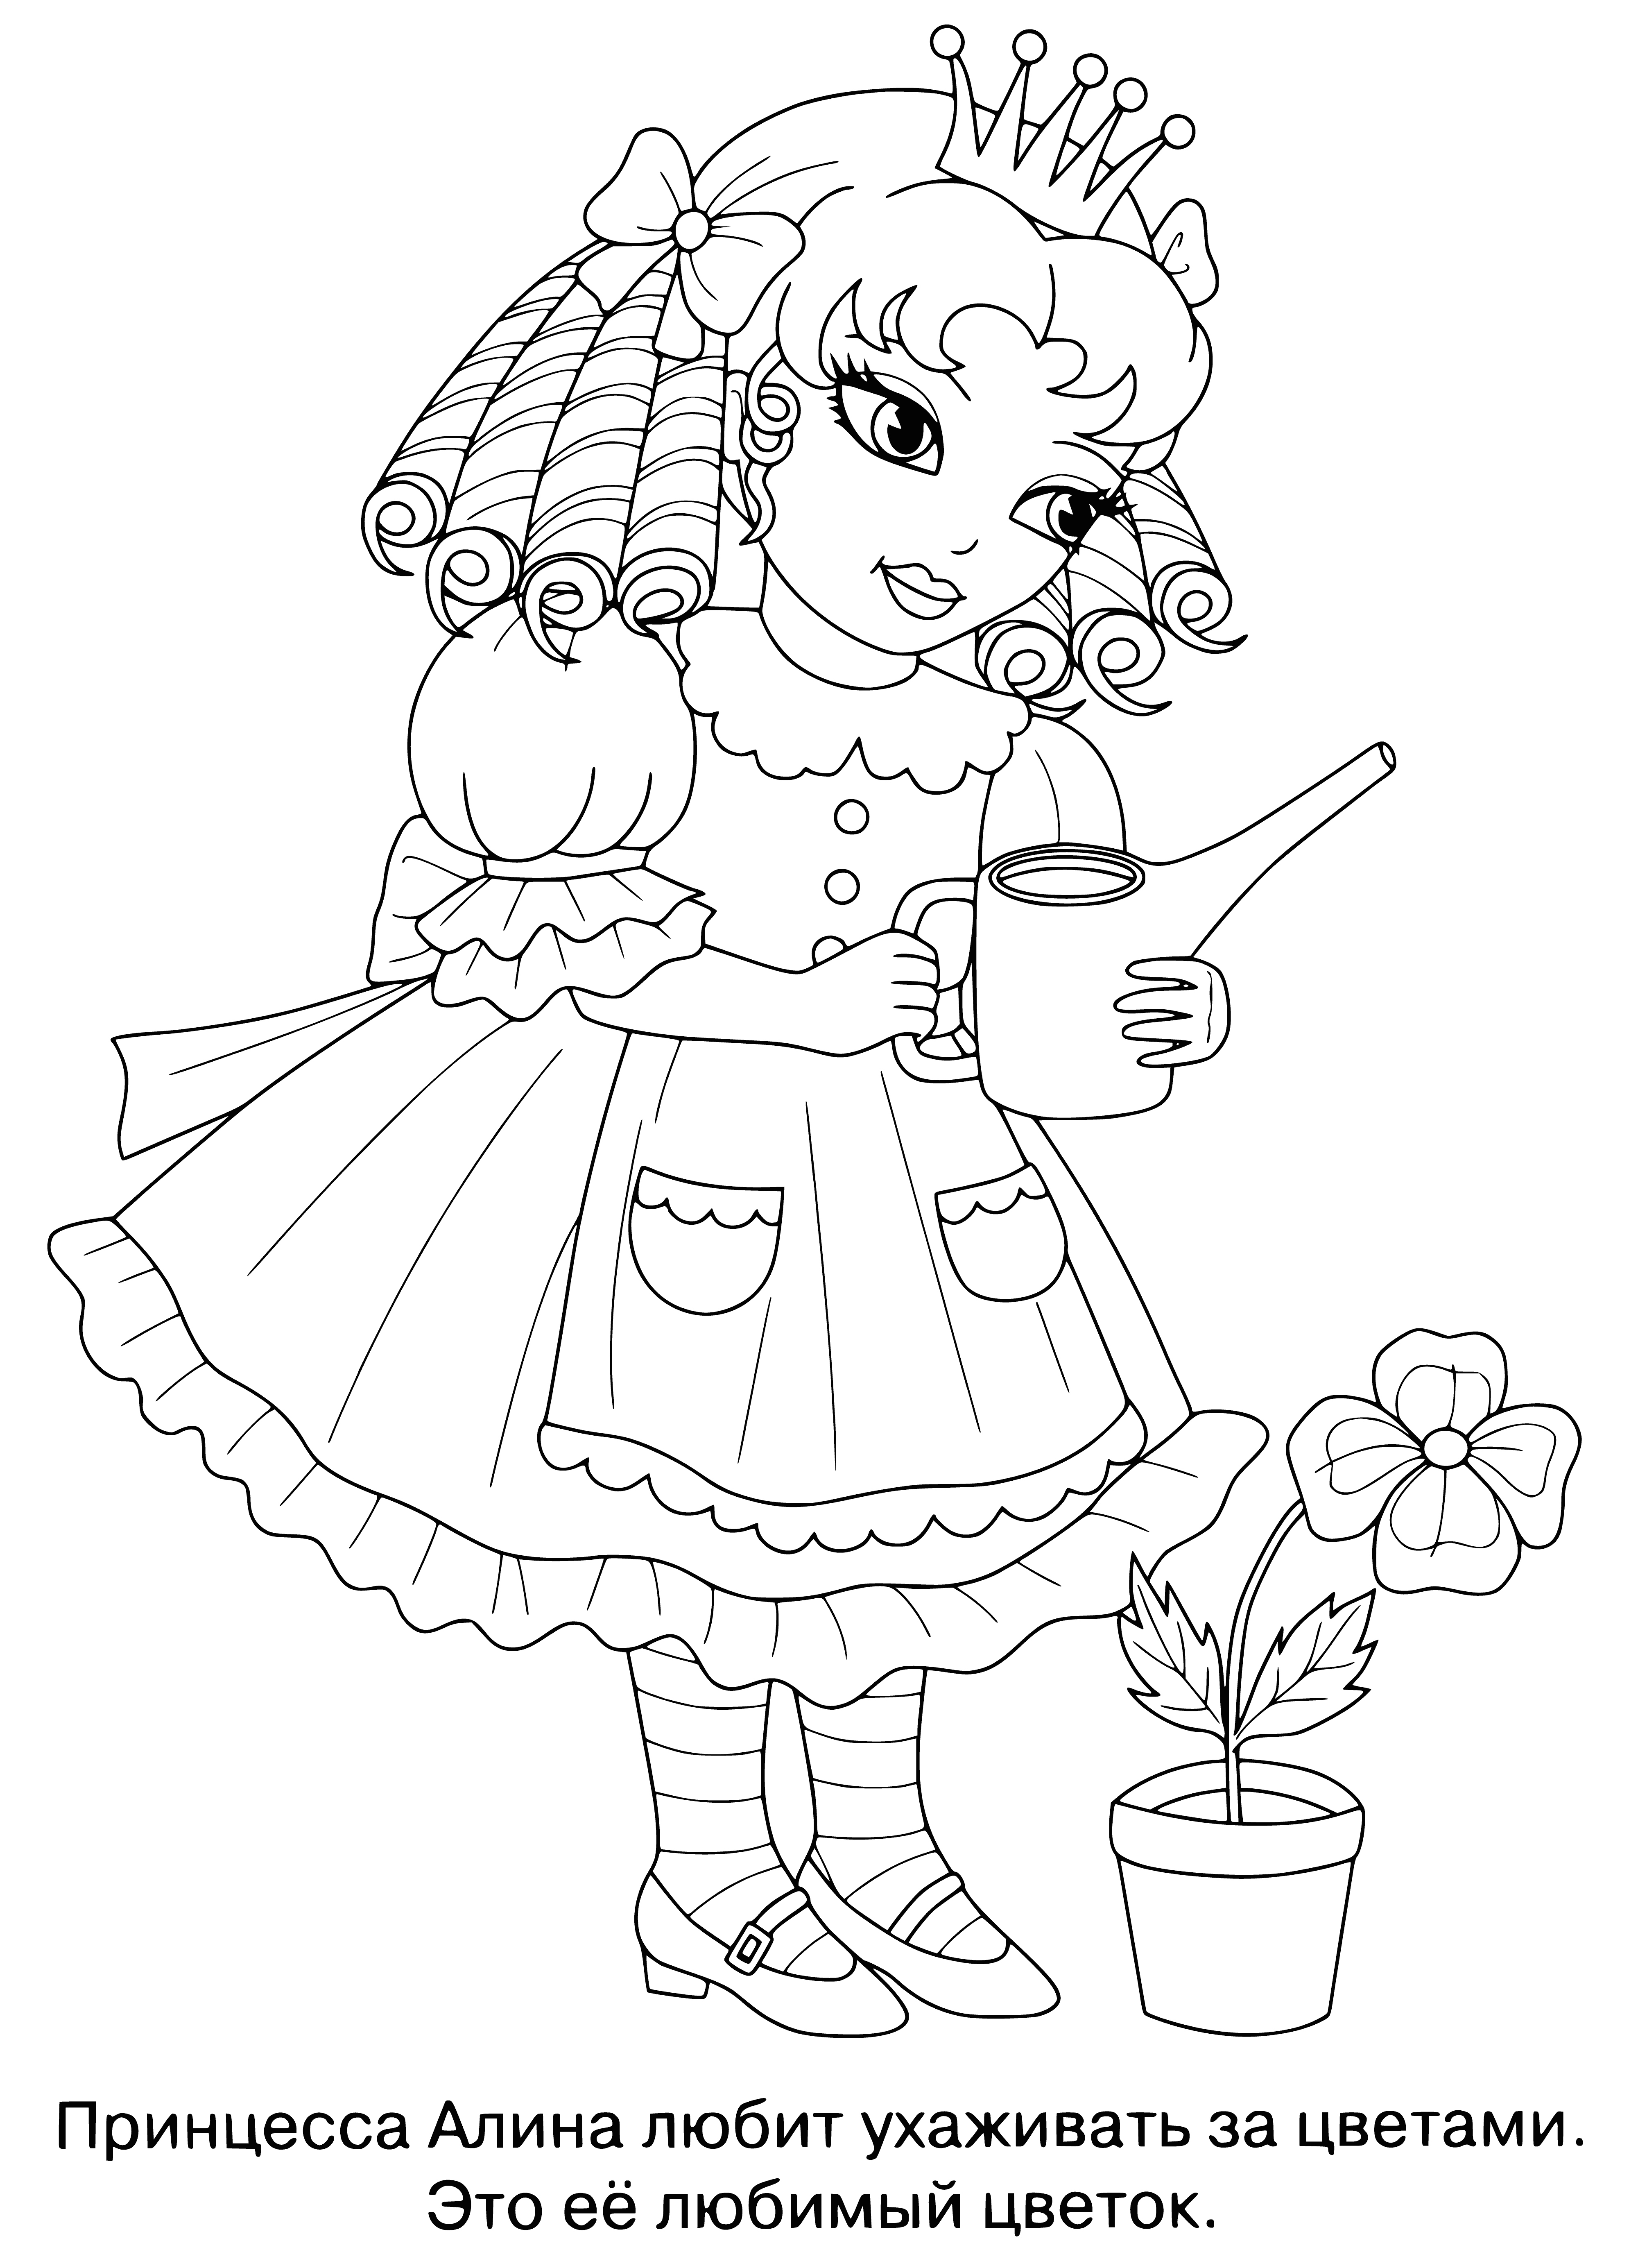 coloring page: Alina is happily playing tea time in her castle bedroom surrounded by her toys, wearing a crown and a pretty dress. #LittlePrincess